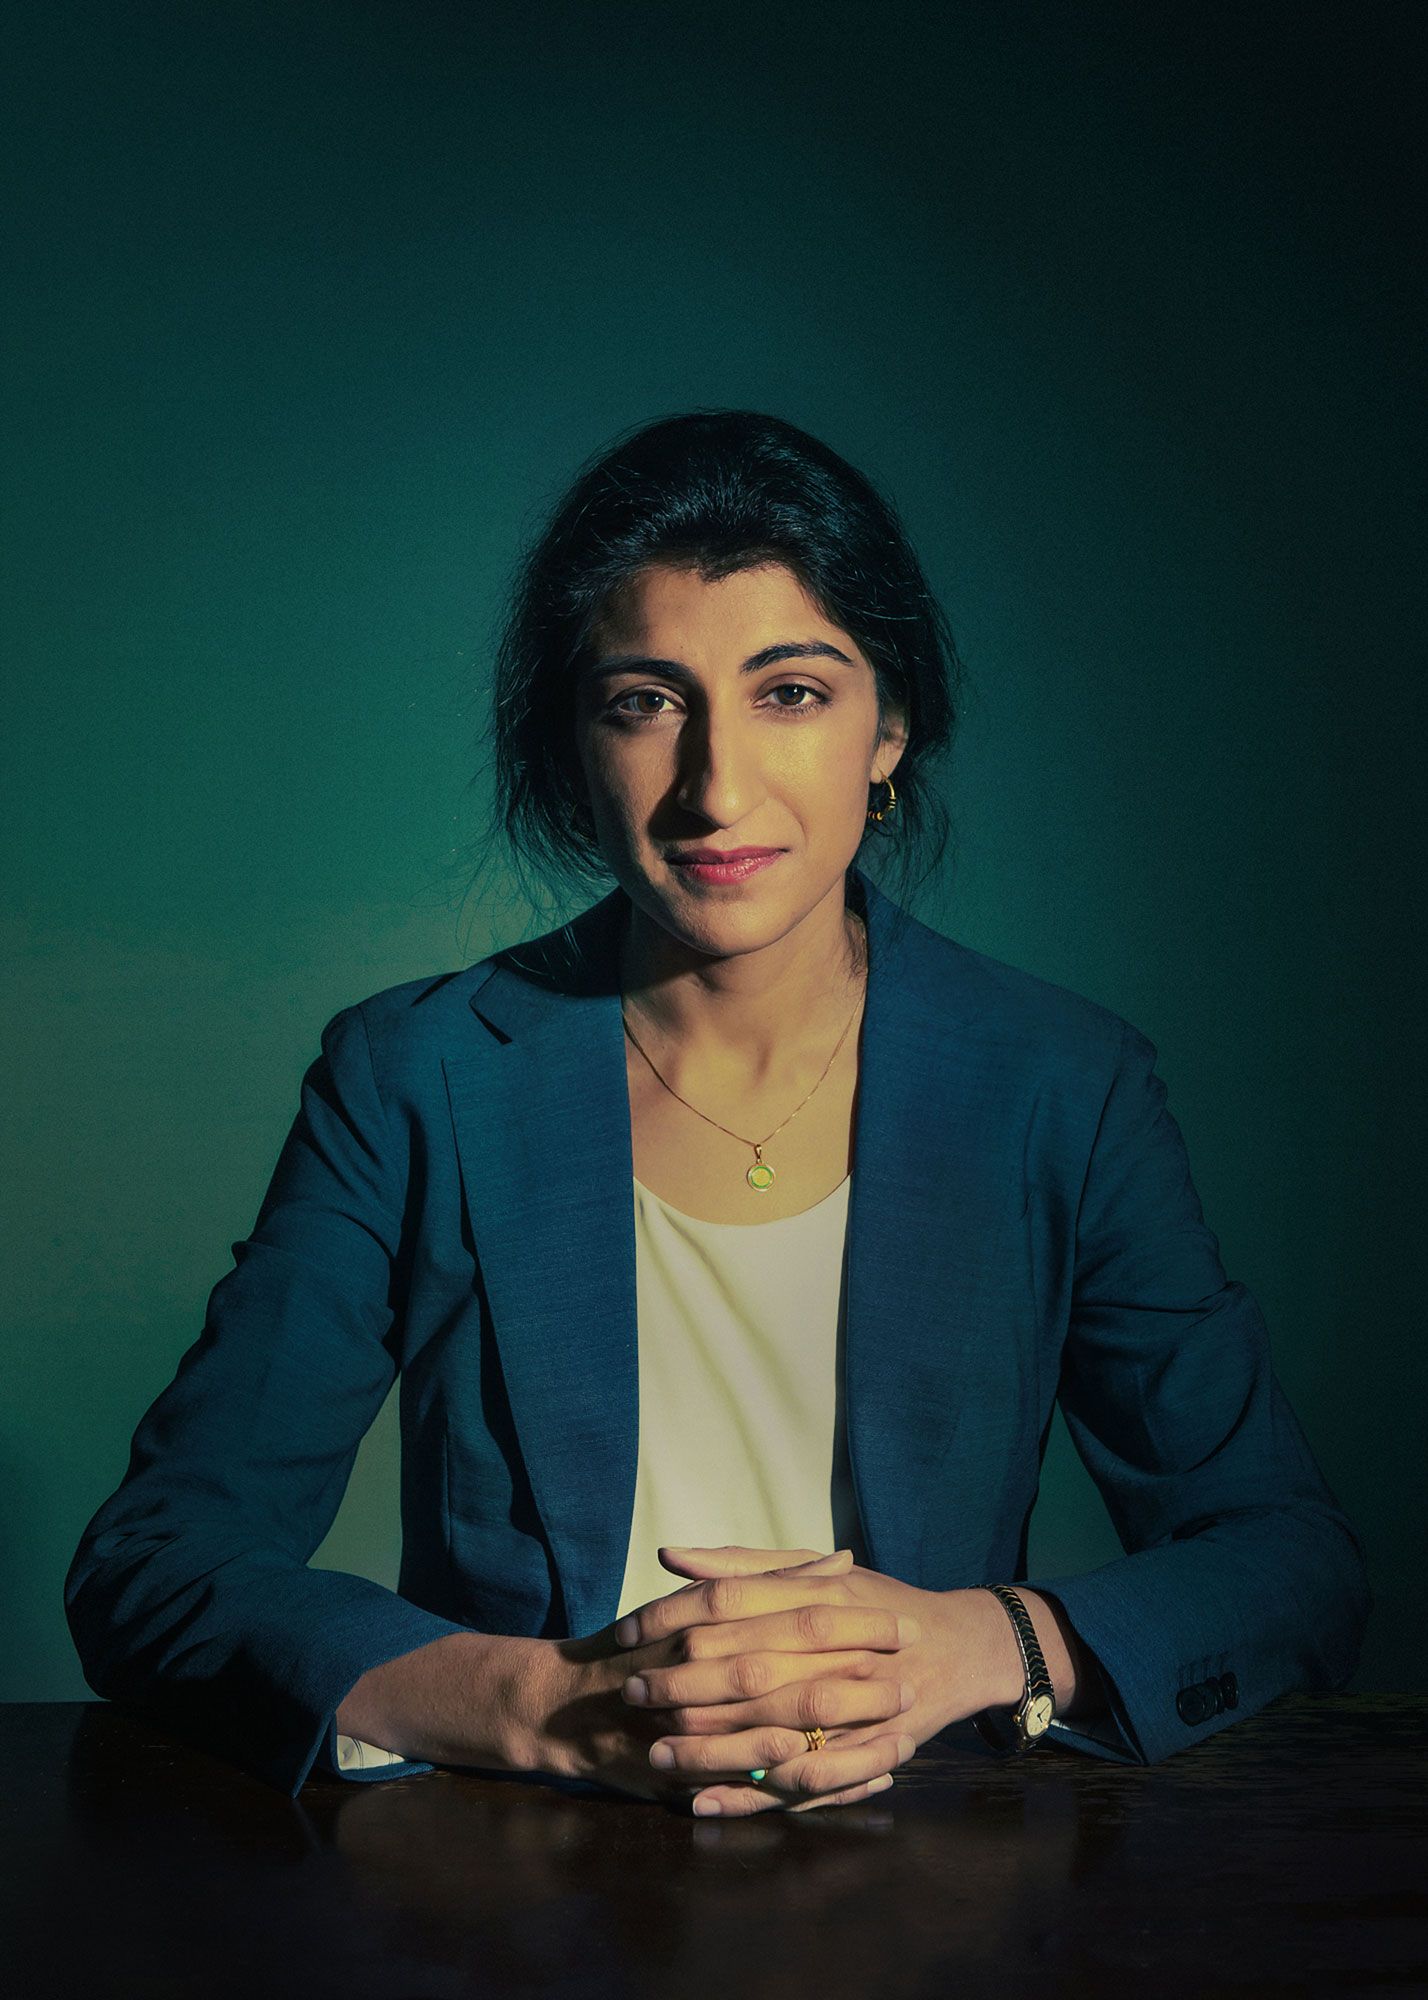 Lina Khan: 'This isn't just about antitrust. It's about values